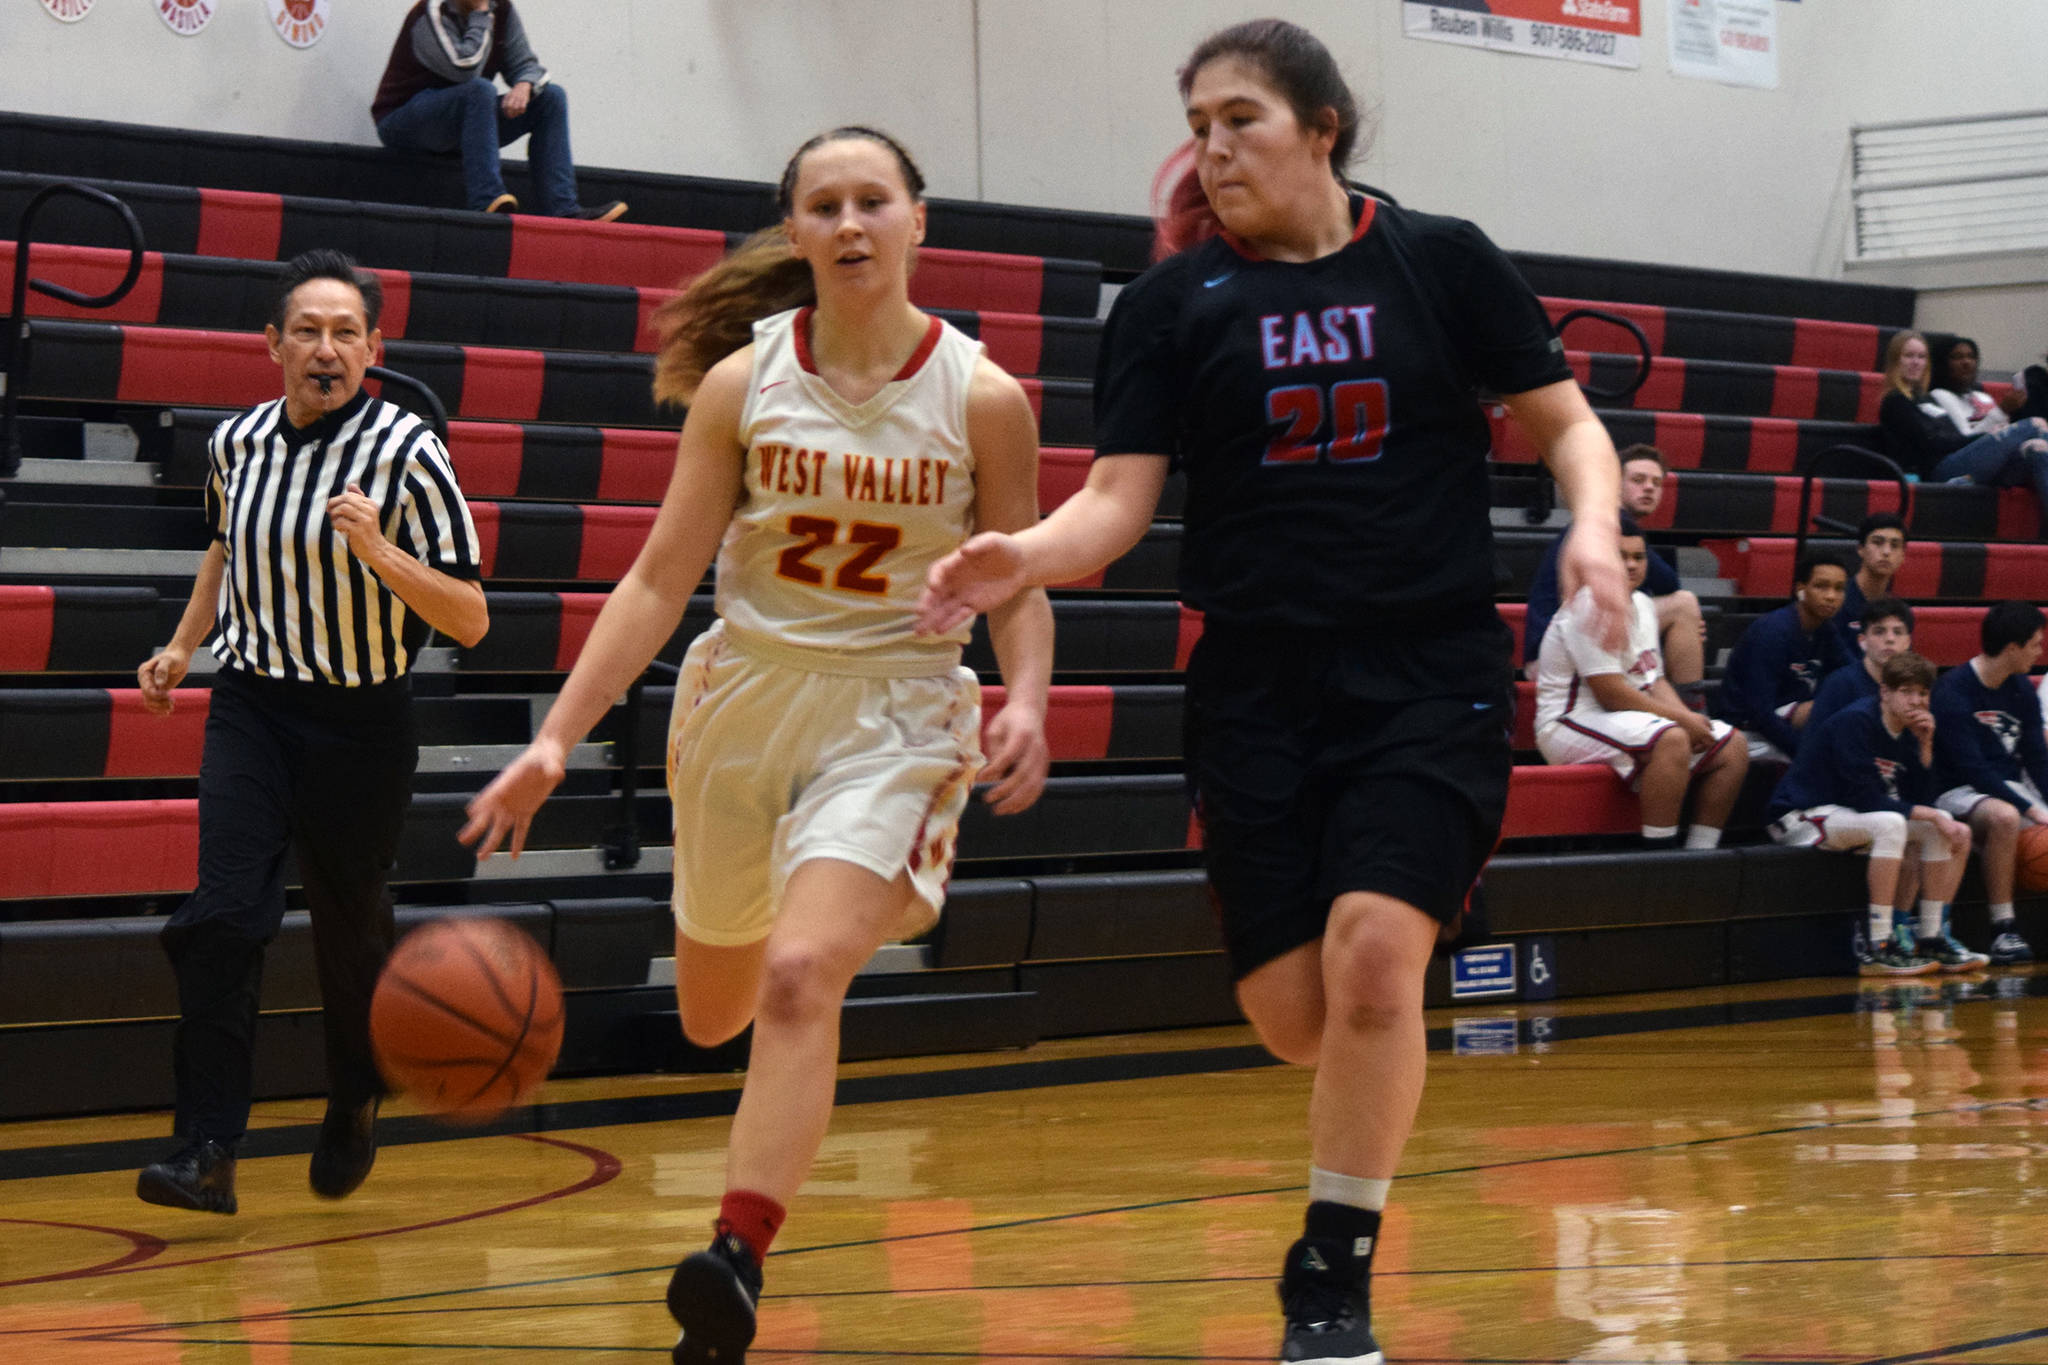 West Valley High School’s Ali May drives against East Anchorage’s Kristi Anderson in the second half of their game at the Princess Cruises Capital City Classic at JDHS on Monday, Dec. 20, 2019. (Nolin Ainsworth | Juneau Empire)